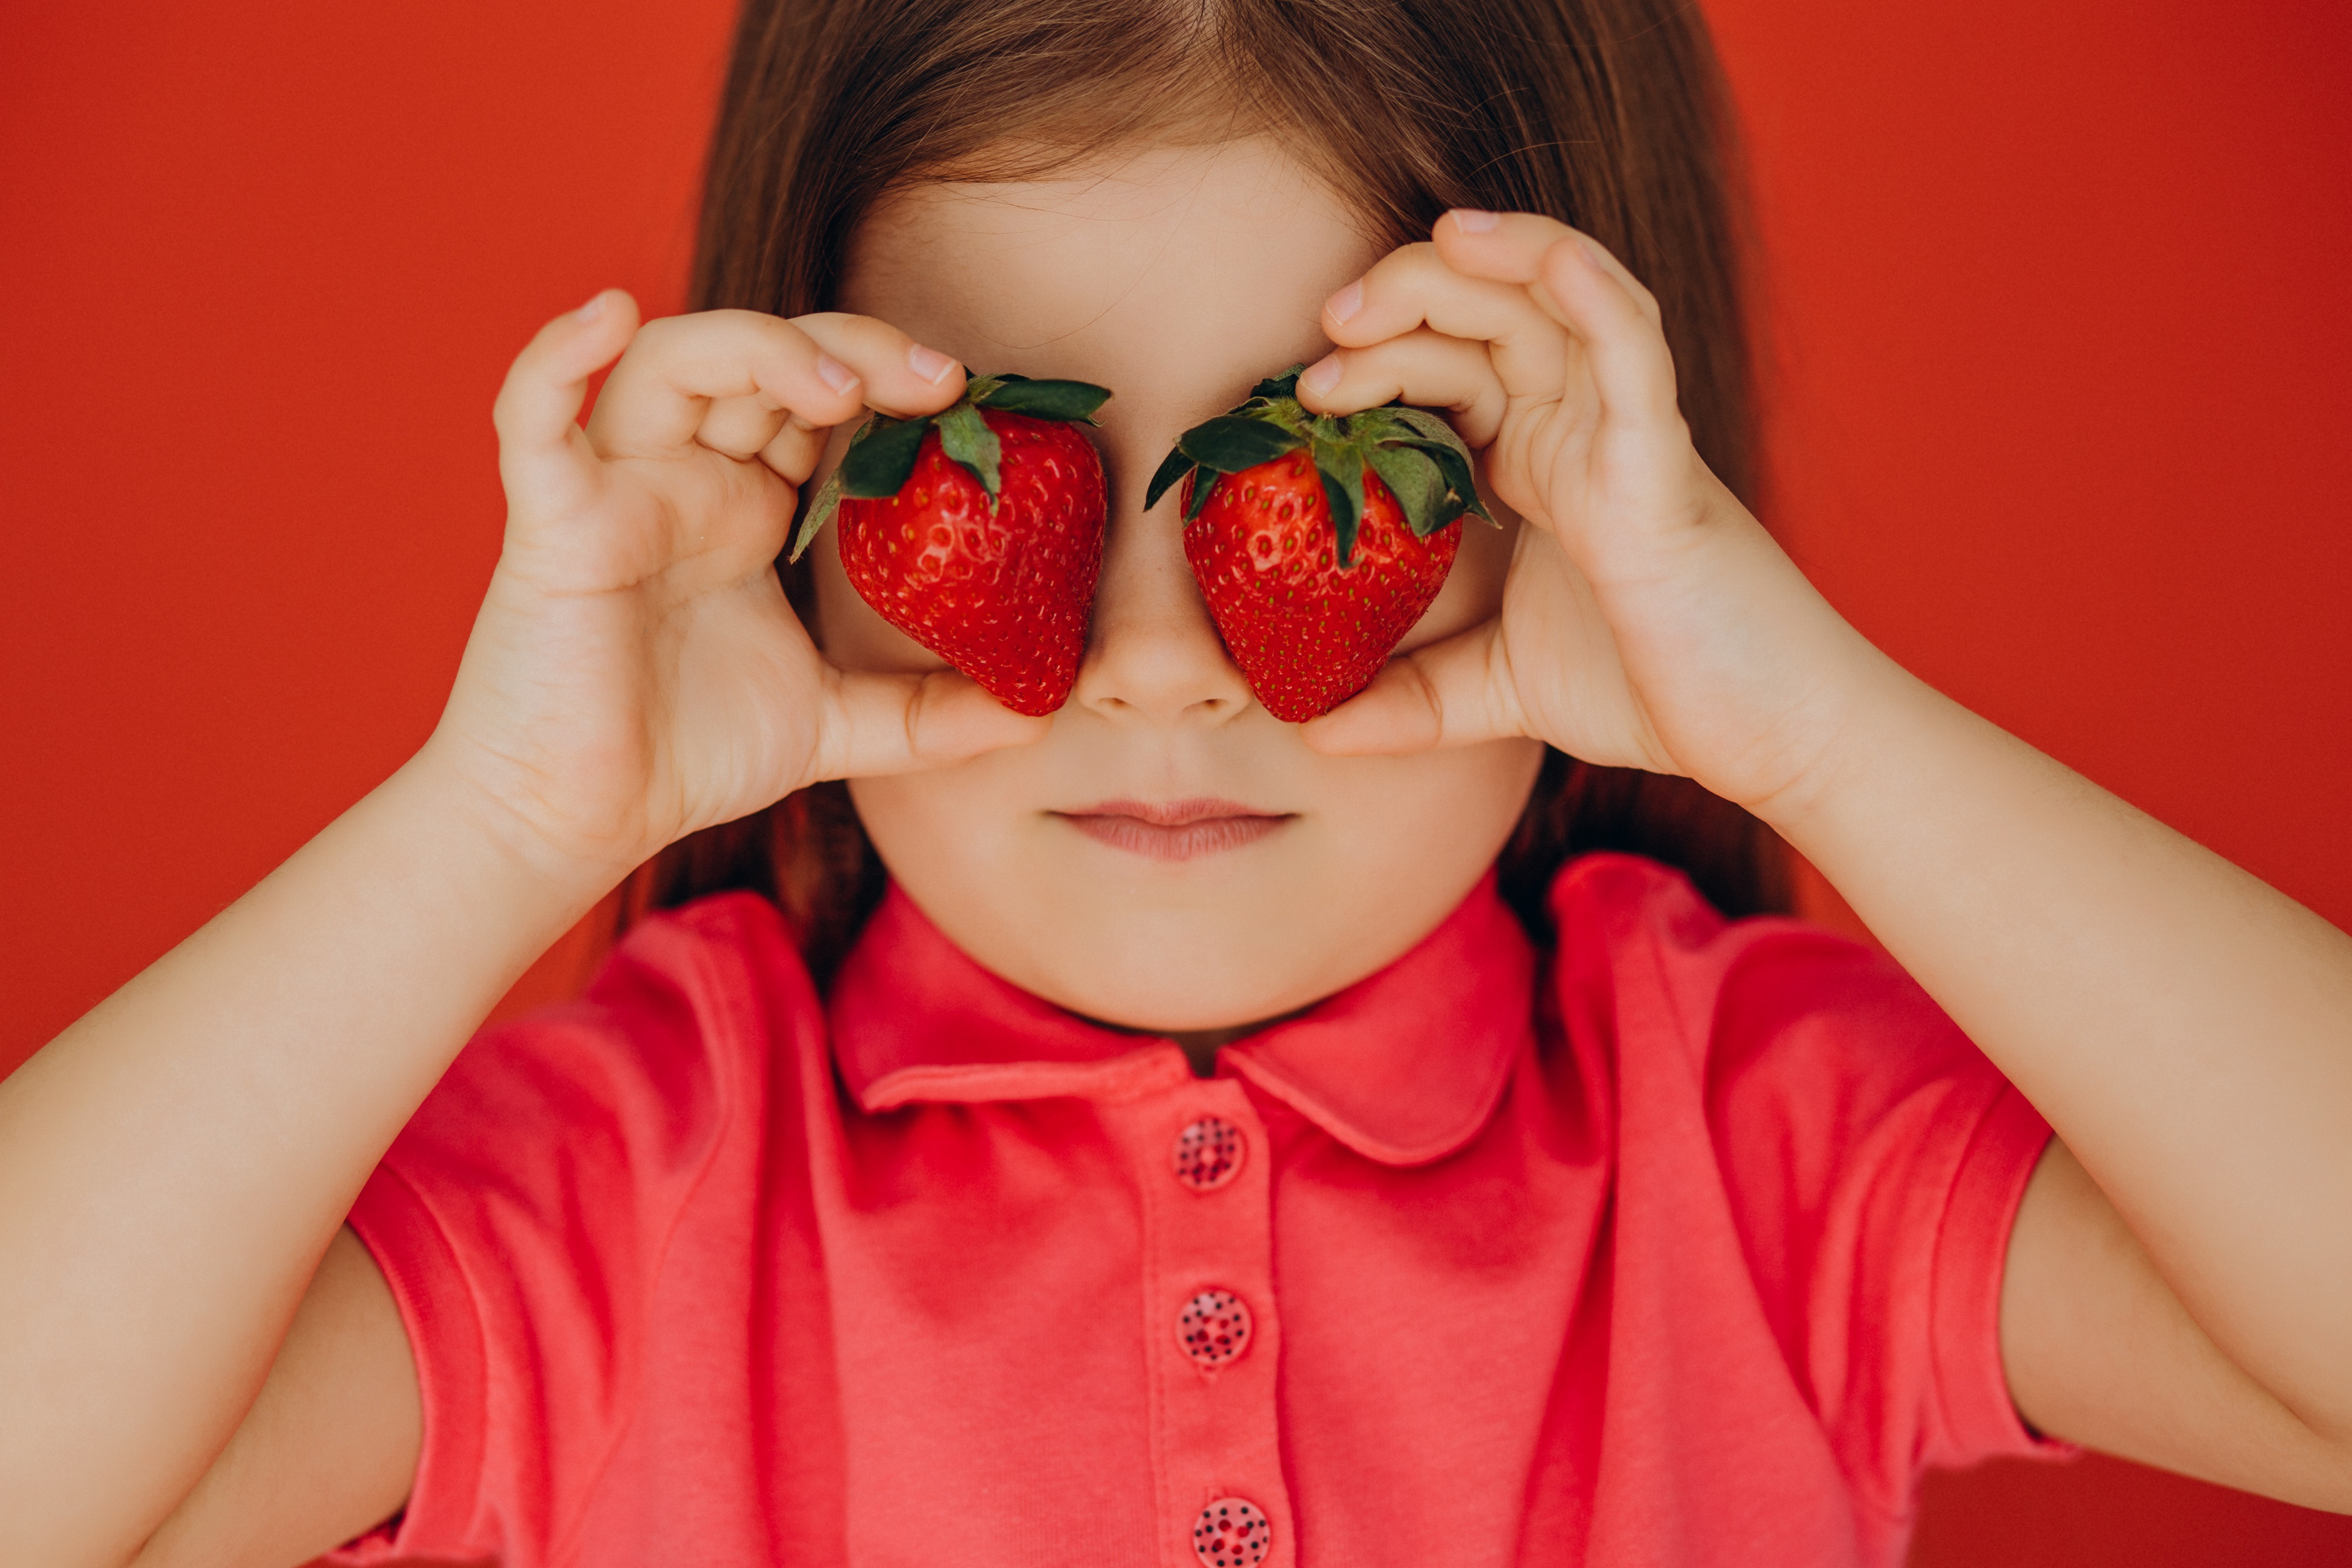 Little girl holding two delicious stawberries